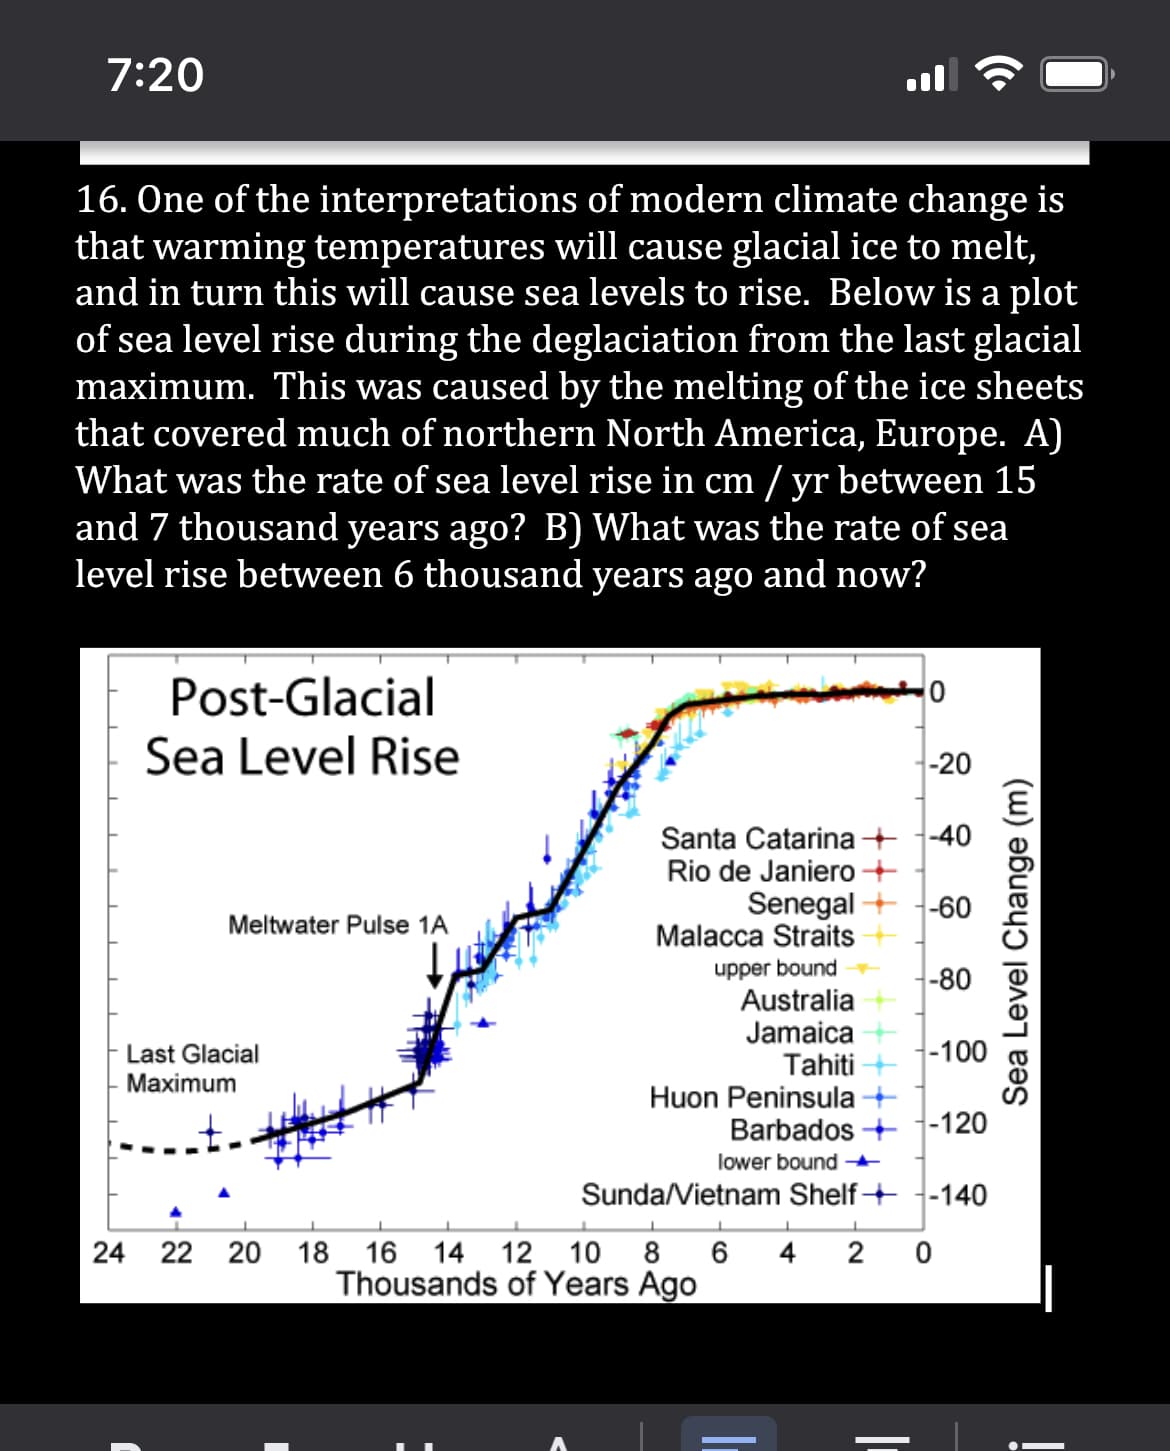 7:20
16. One of the interpretations of modern climate change is
that warming temperatures will cause glacial ice to melt,
and in turn this will cause sea levels to rise. Below is a plot
of sea level rise during the deglaciation from the last glacial
maximum. This was caused by the melting of the ice sheets
that covered much of northern North America, Europe. A)
What was the rate of sea level rise in cm / yr between 15
and 7 thousand years ago? B) What was the rate of sea
level rise between 6 thousand years ago and now?
0
Post-Glacial
Sea Level Rise
-20
-40
Santa Catarina
Rio de Janiero +
Senegal -60
Meltwater Pulse 1A
Malacca Straits
upper bound
-80
Australia
Jamaica
-100
Tahiti
Huon Peninsula →
Barbados -120
lower bound →
Sunda/Vietnam Shelf
-140
L
L
1
↓
L
4 2
18 16 14 12 10 8 6
Thousands of Years Ago
Last Glacial
Maximum
24 22 20
0
Sea Level Change (m)